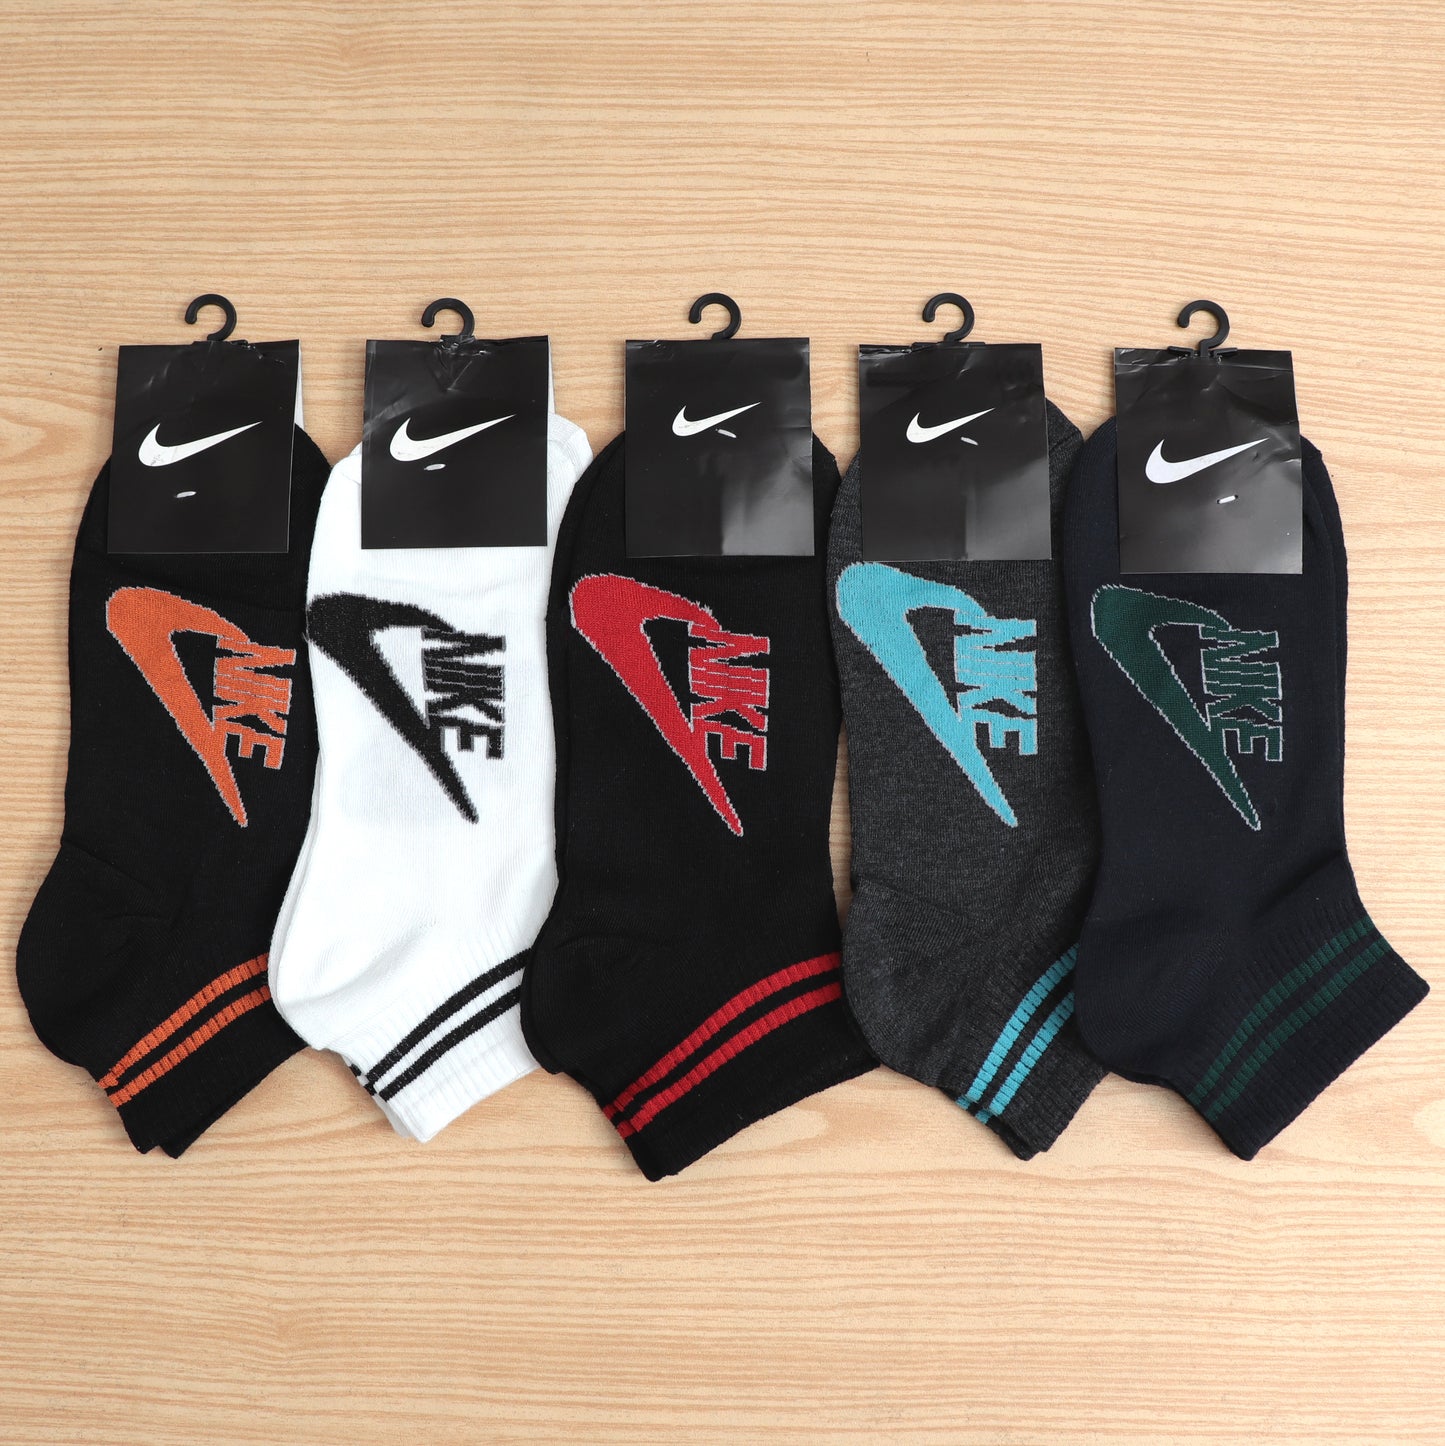 SKS-A1-BUNDLE OFFER 4 PACKS OF "PACK OF 5" IMPORTED ANKLE SOCKS (20 PAIRS)